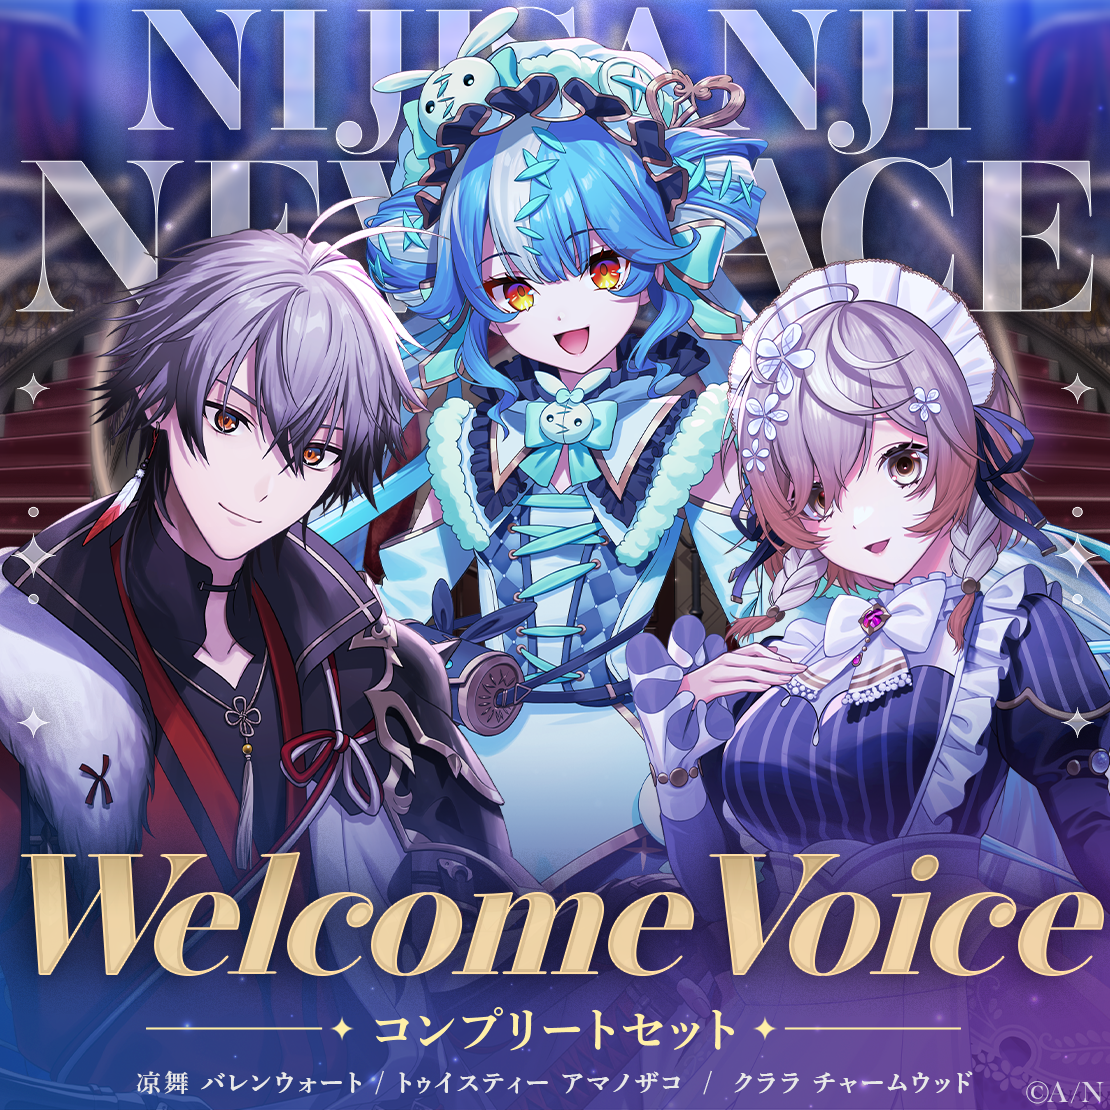 【Welcome Voice】Denauth コンプリートセット